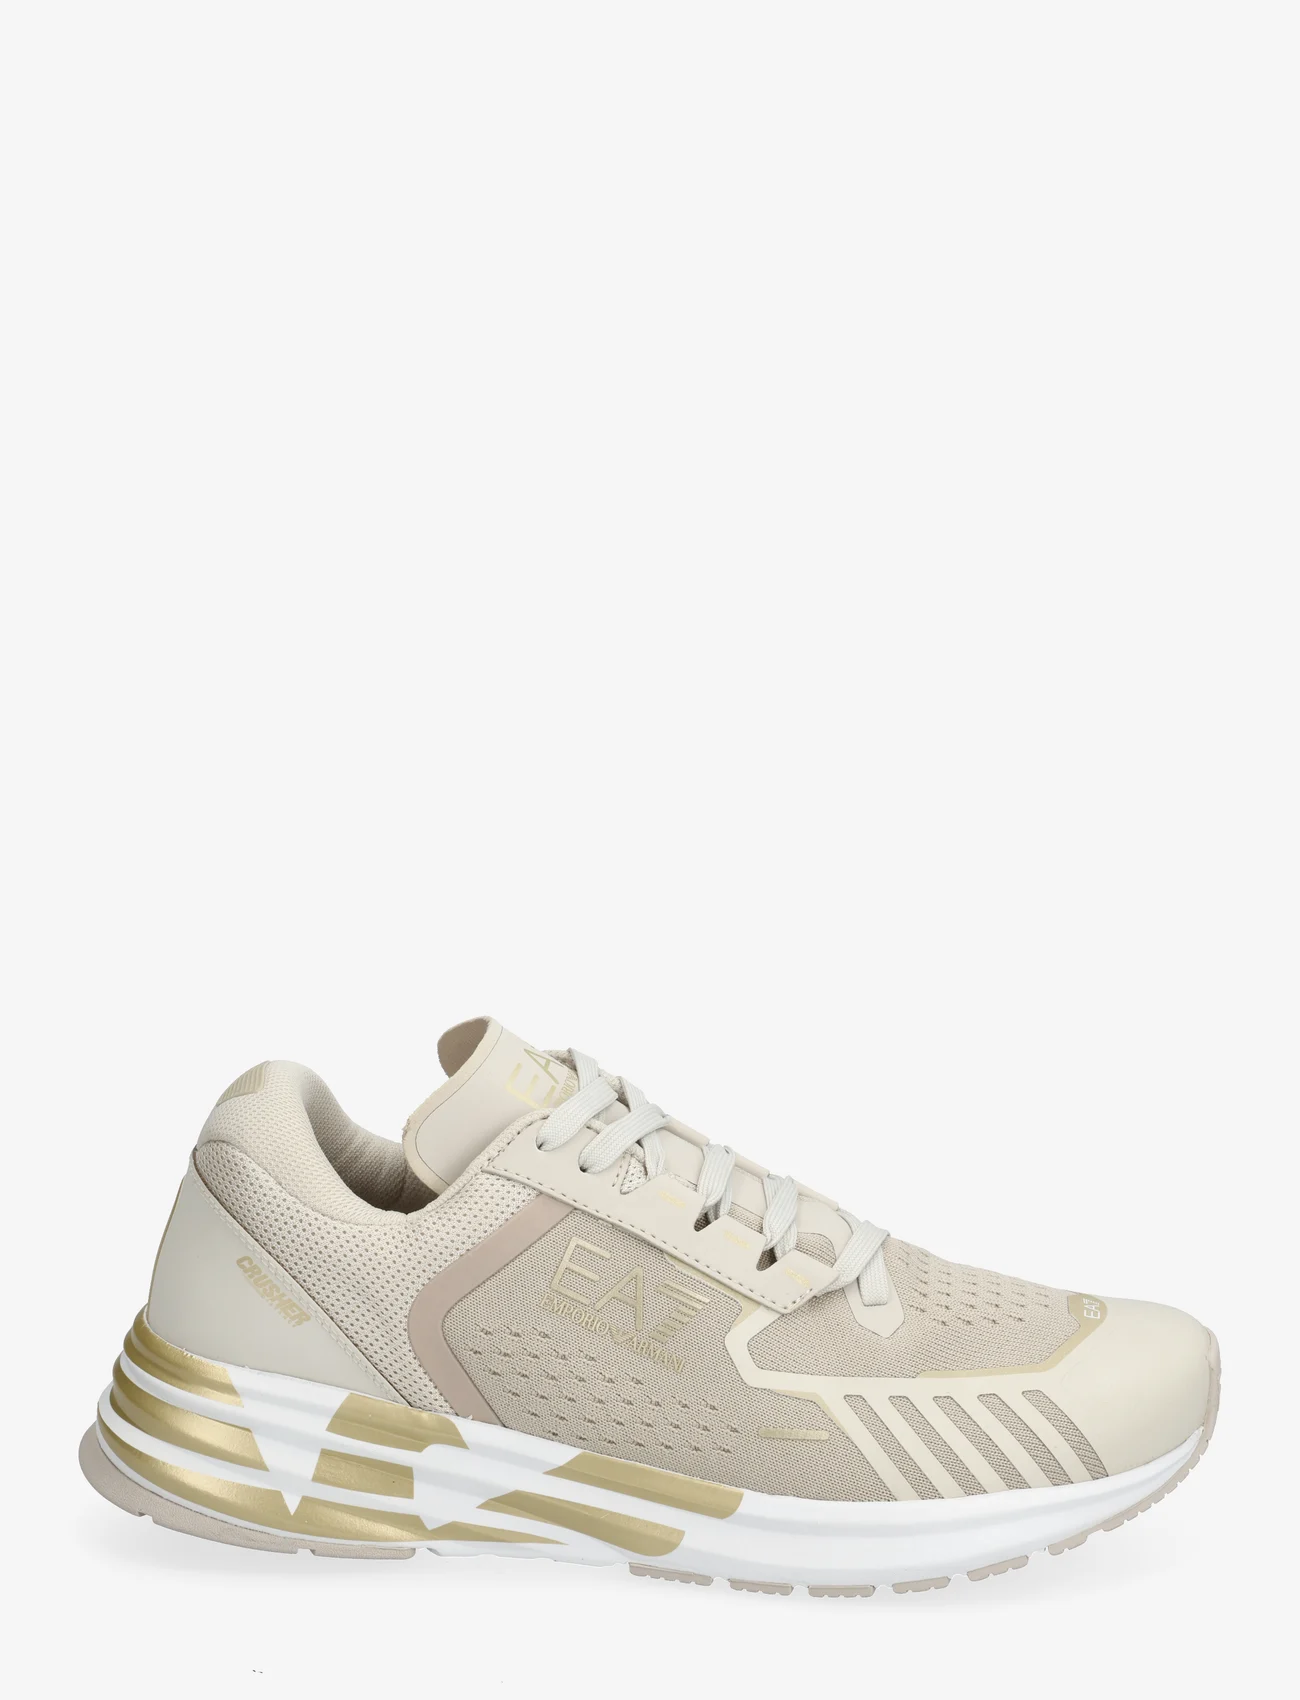 EA7 - SNEAKERS - lave sneakers - q309-rainy day+gold - 1